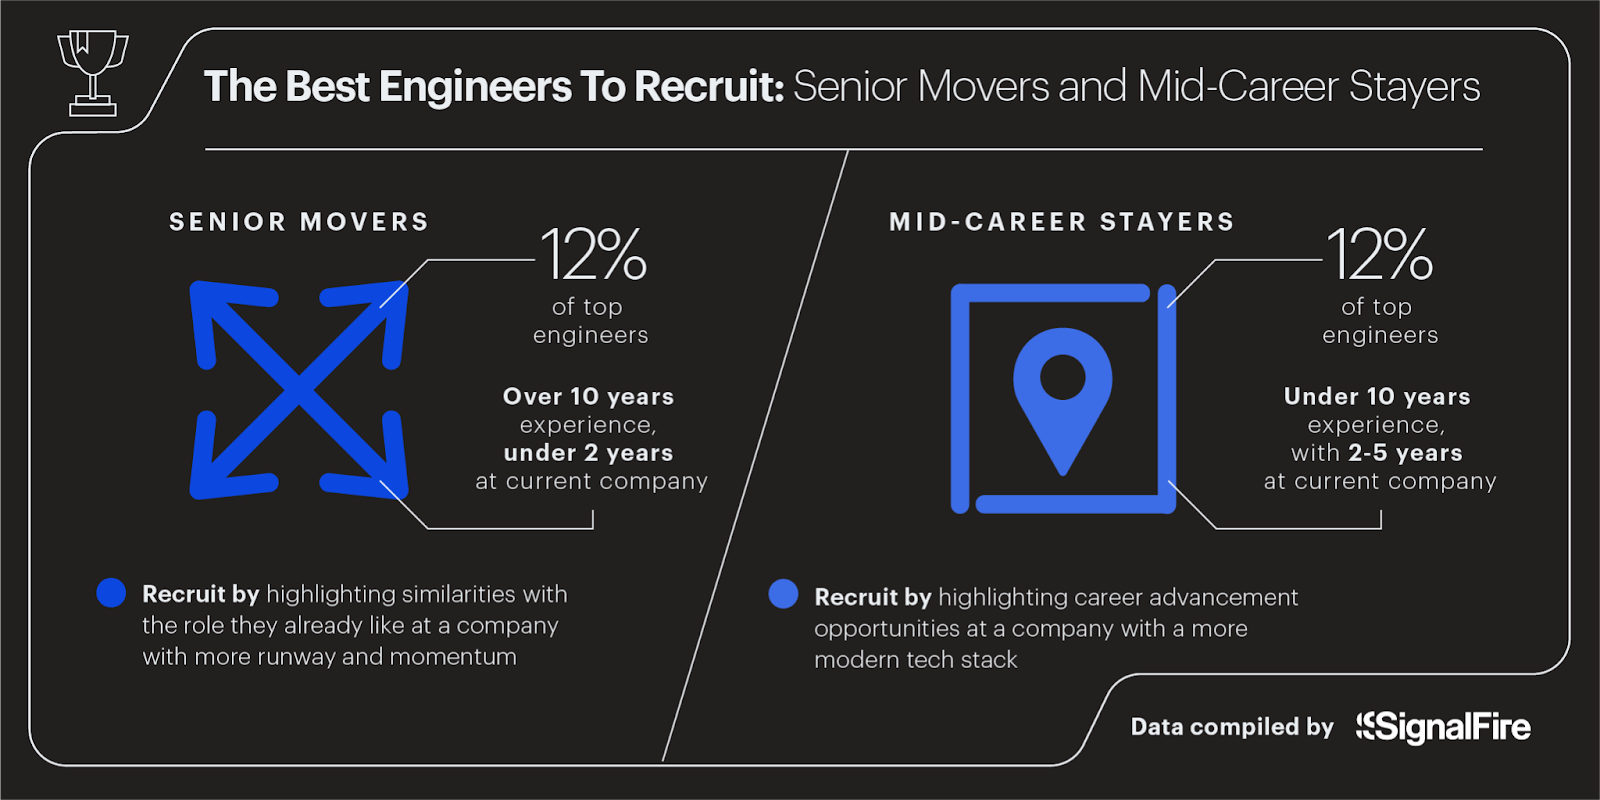 The best engineers to recruit are senior movers and mid-career stayers.